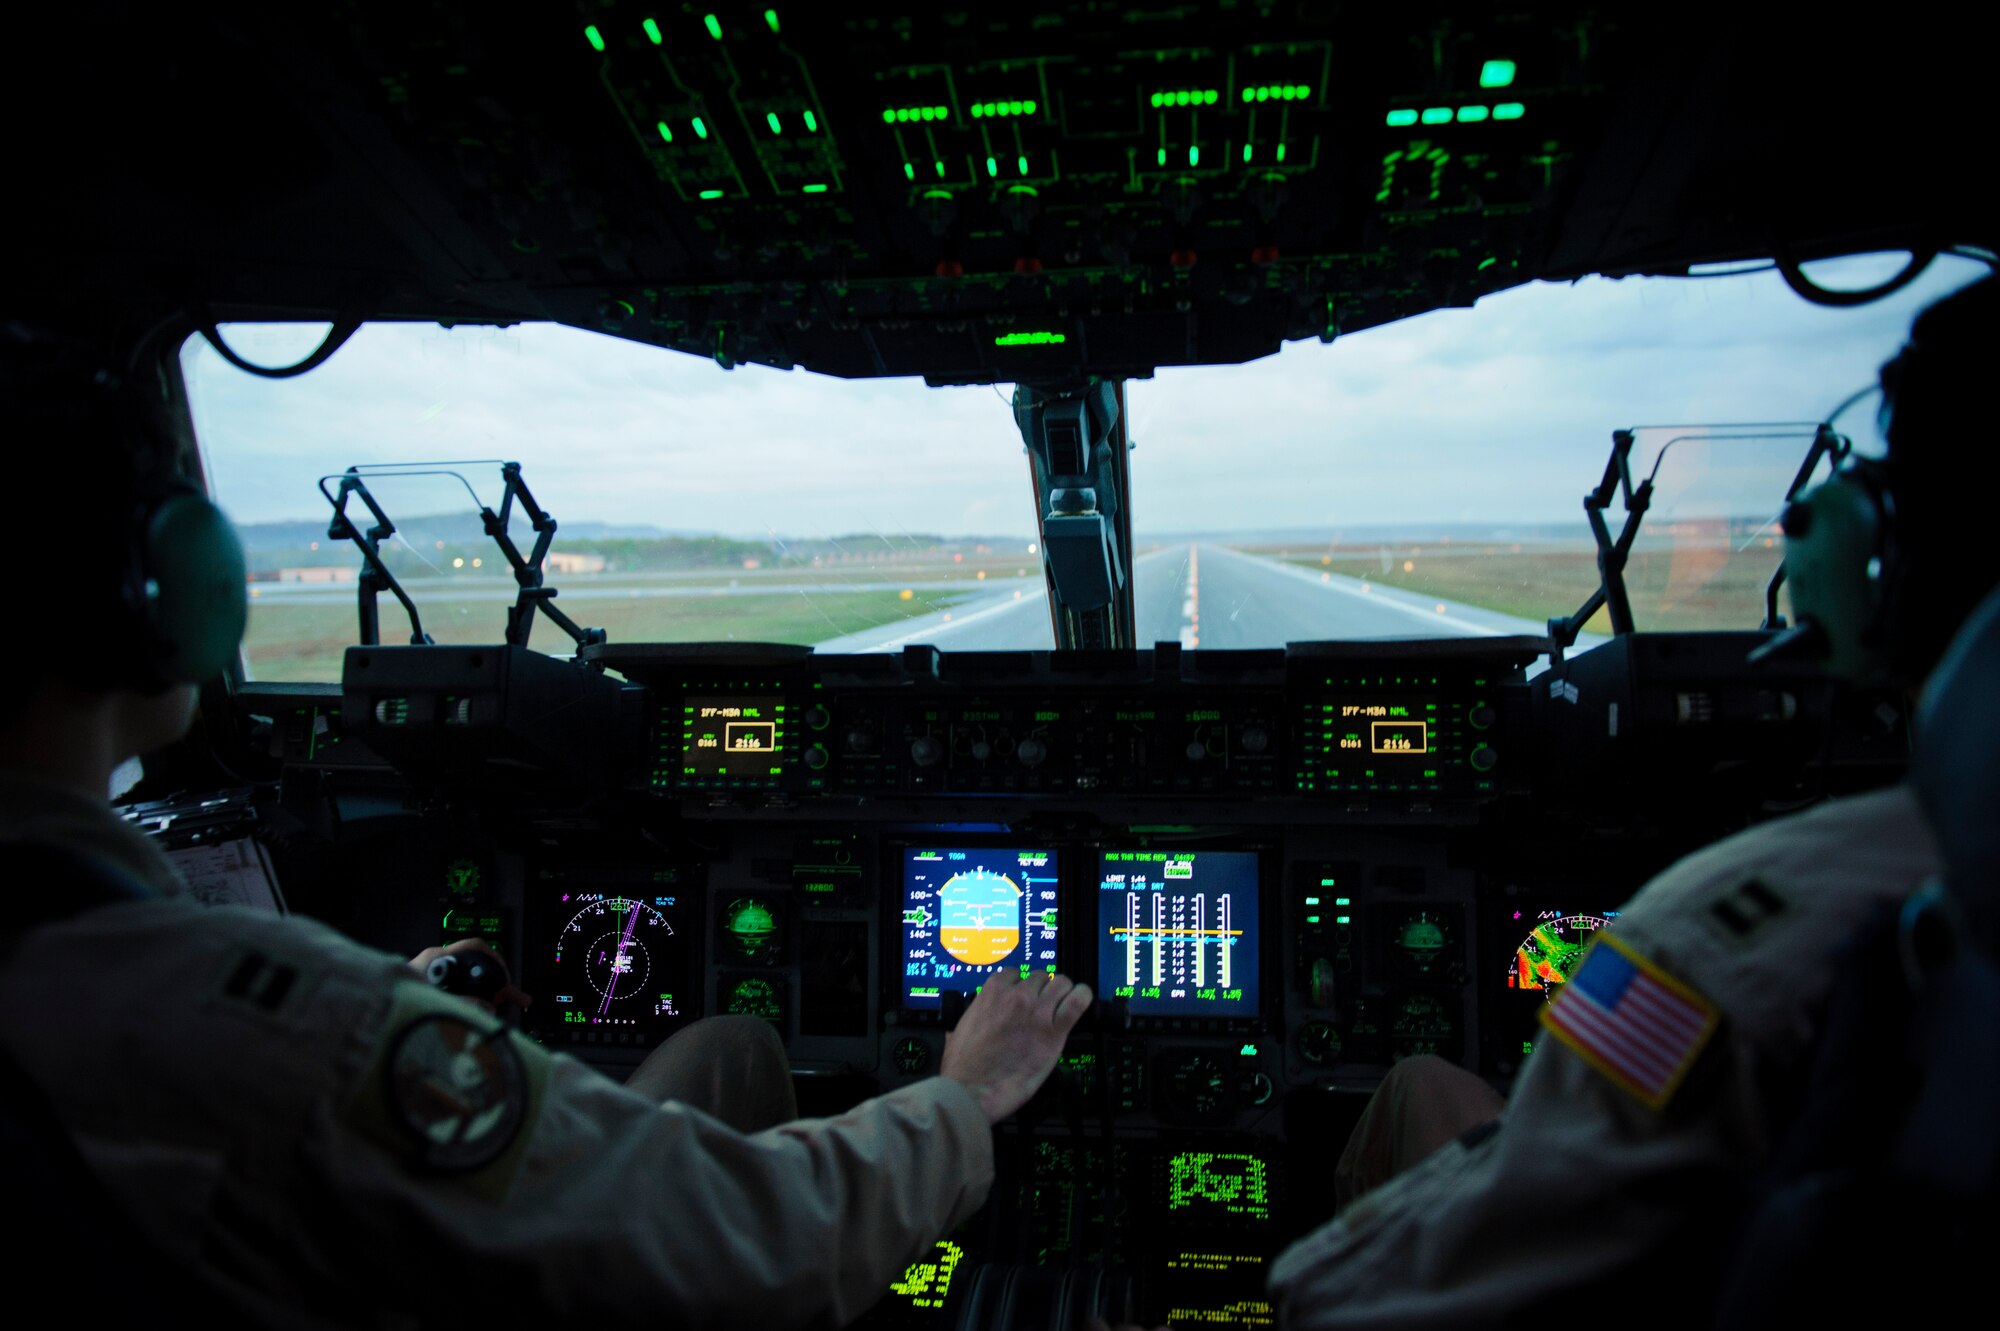 RAMSTEIN AIR BASE, Germany – Capt. Tyrus Scott and Capt. Carlos Nivia, 816th Expeditionary Airlift Squadron pilots, taxis his C-17 Globemaster III for take-off April 27, 2012. (U.S. Air Force photo/Staff Sgt. Nathanael Callon)